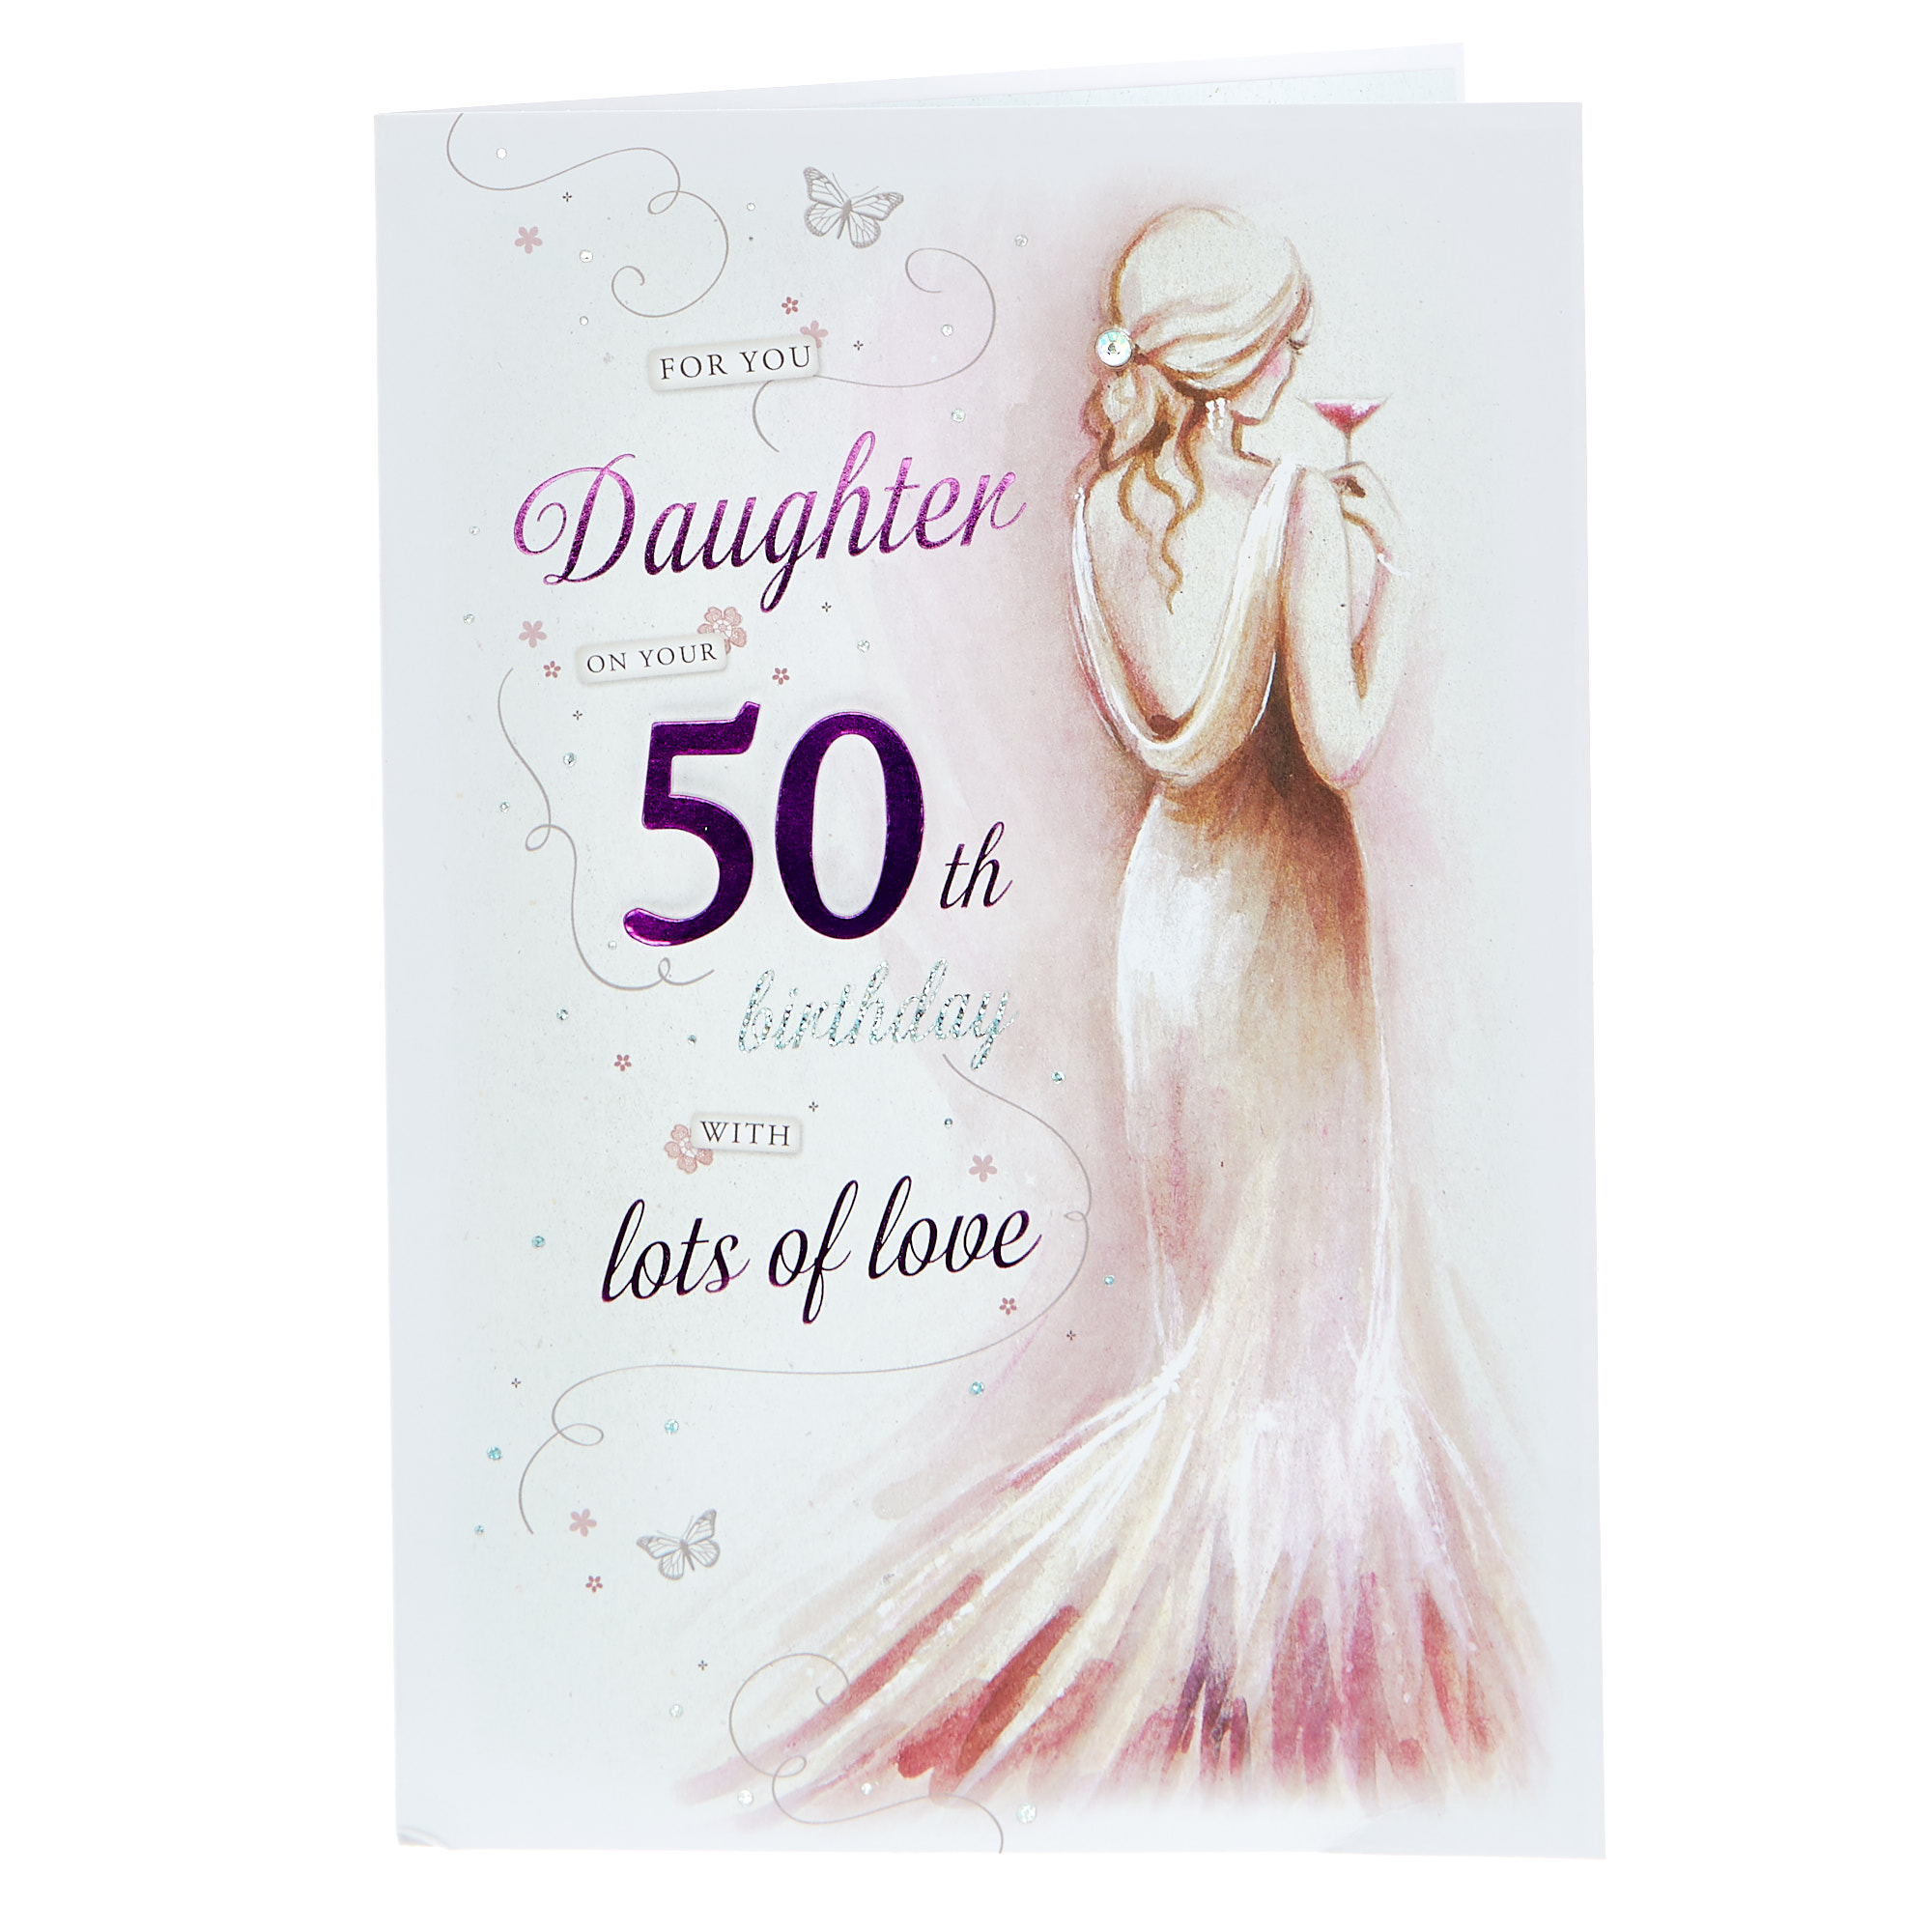 Buy 50th Birthday Card - Daughter Lots Of Love for GBP 1.99 | Card ...